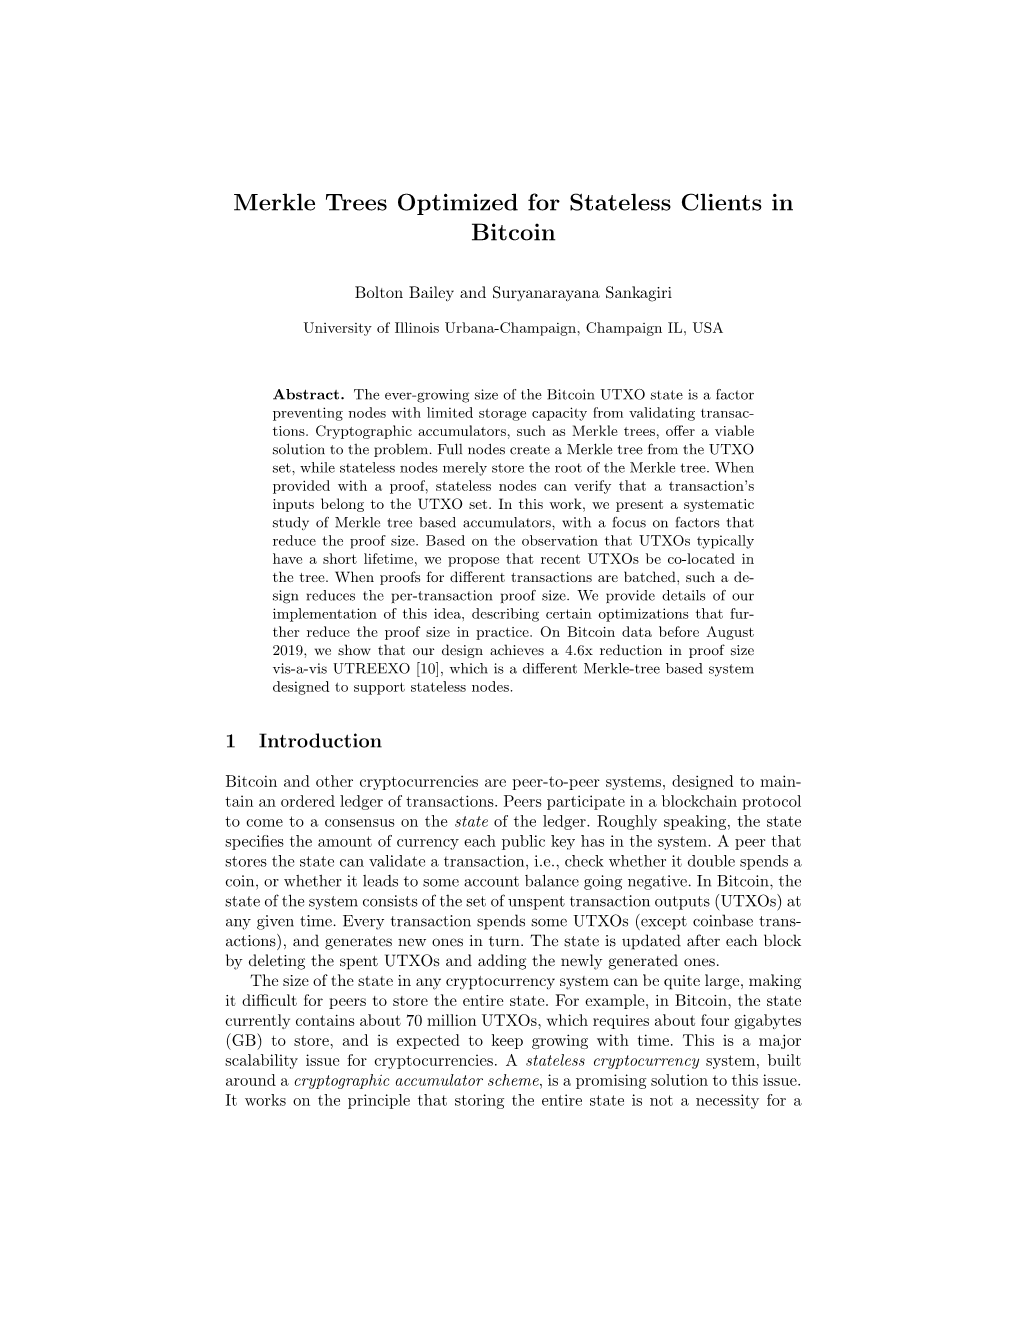 Merkle Trees Optimized for Stateless Clients in Bitcoin